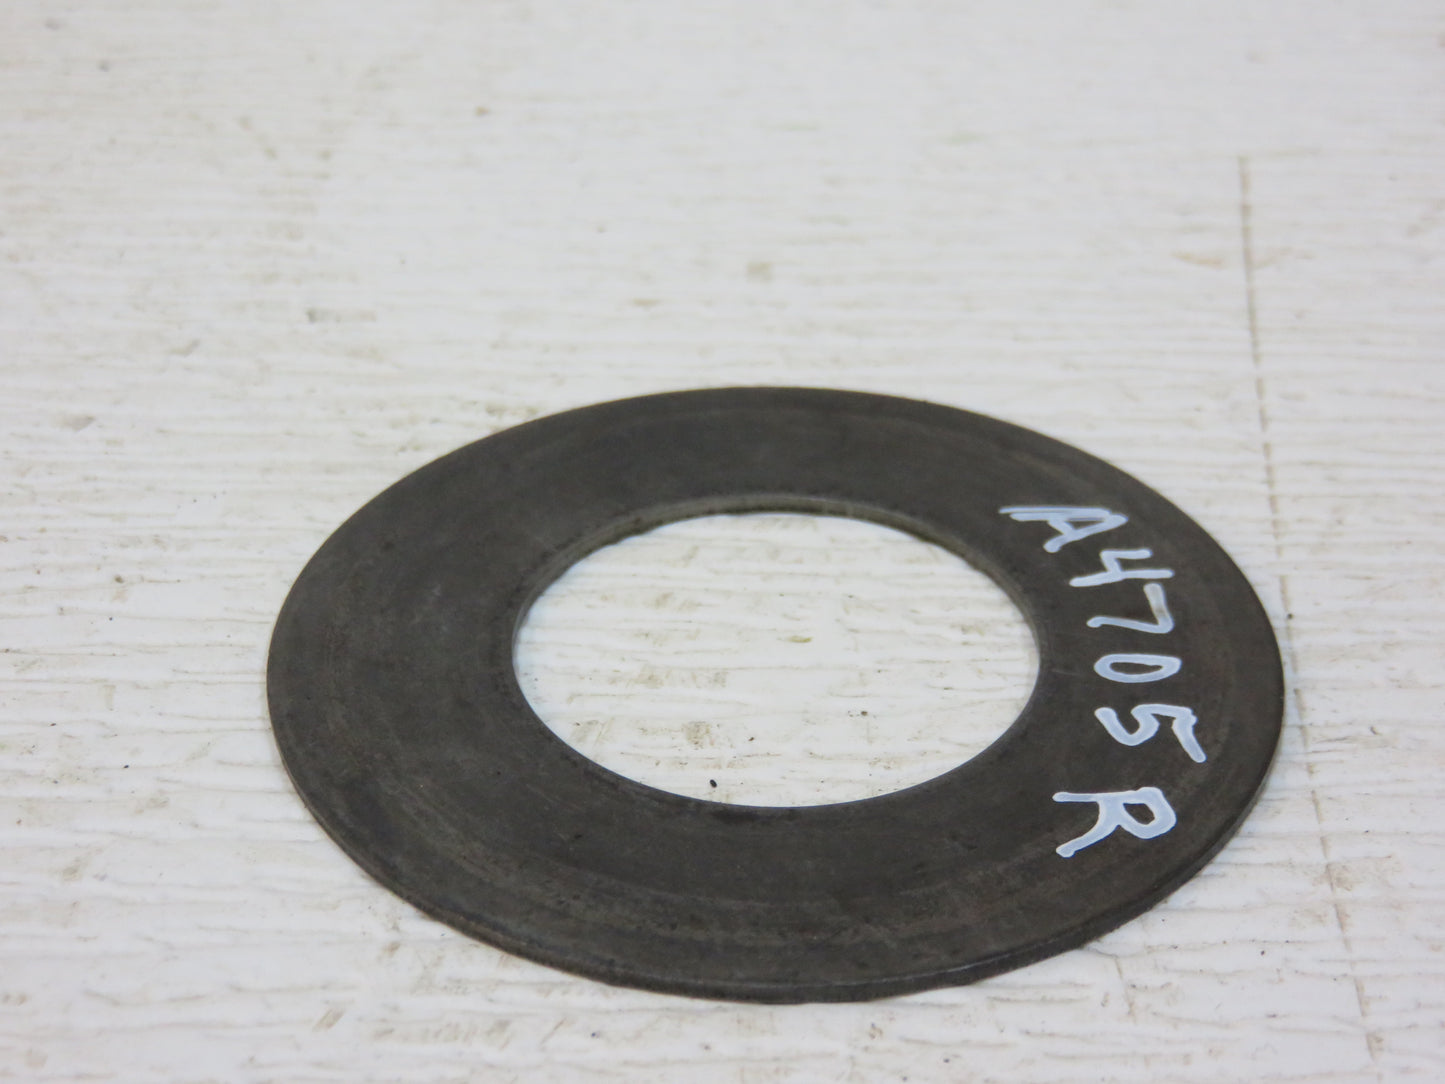 A4705R John Deere PTO Clutch Shaft Washer For 50, 60, 70, 80, 520, 620, 720, 820, 530, 630, 730, 830, 840